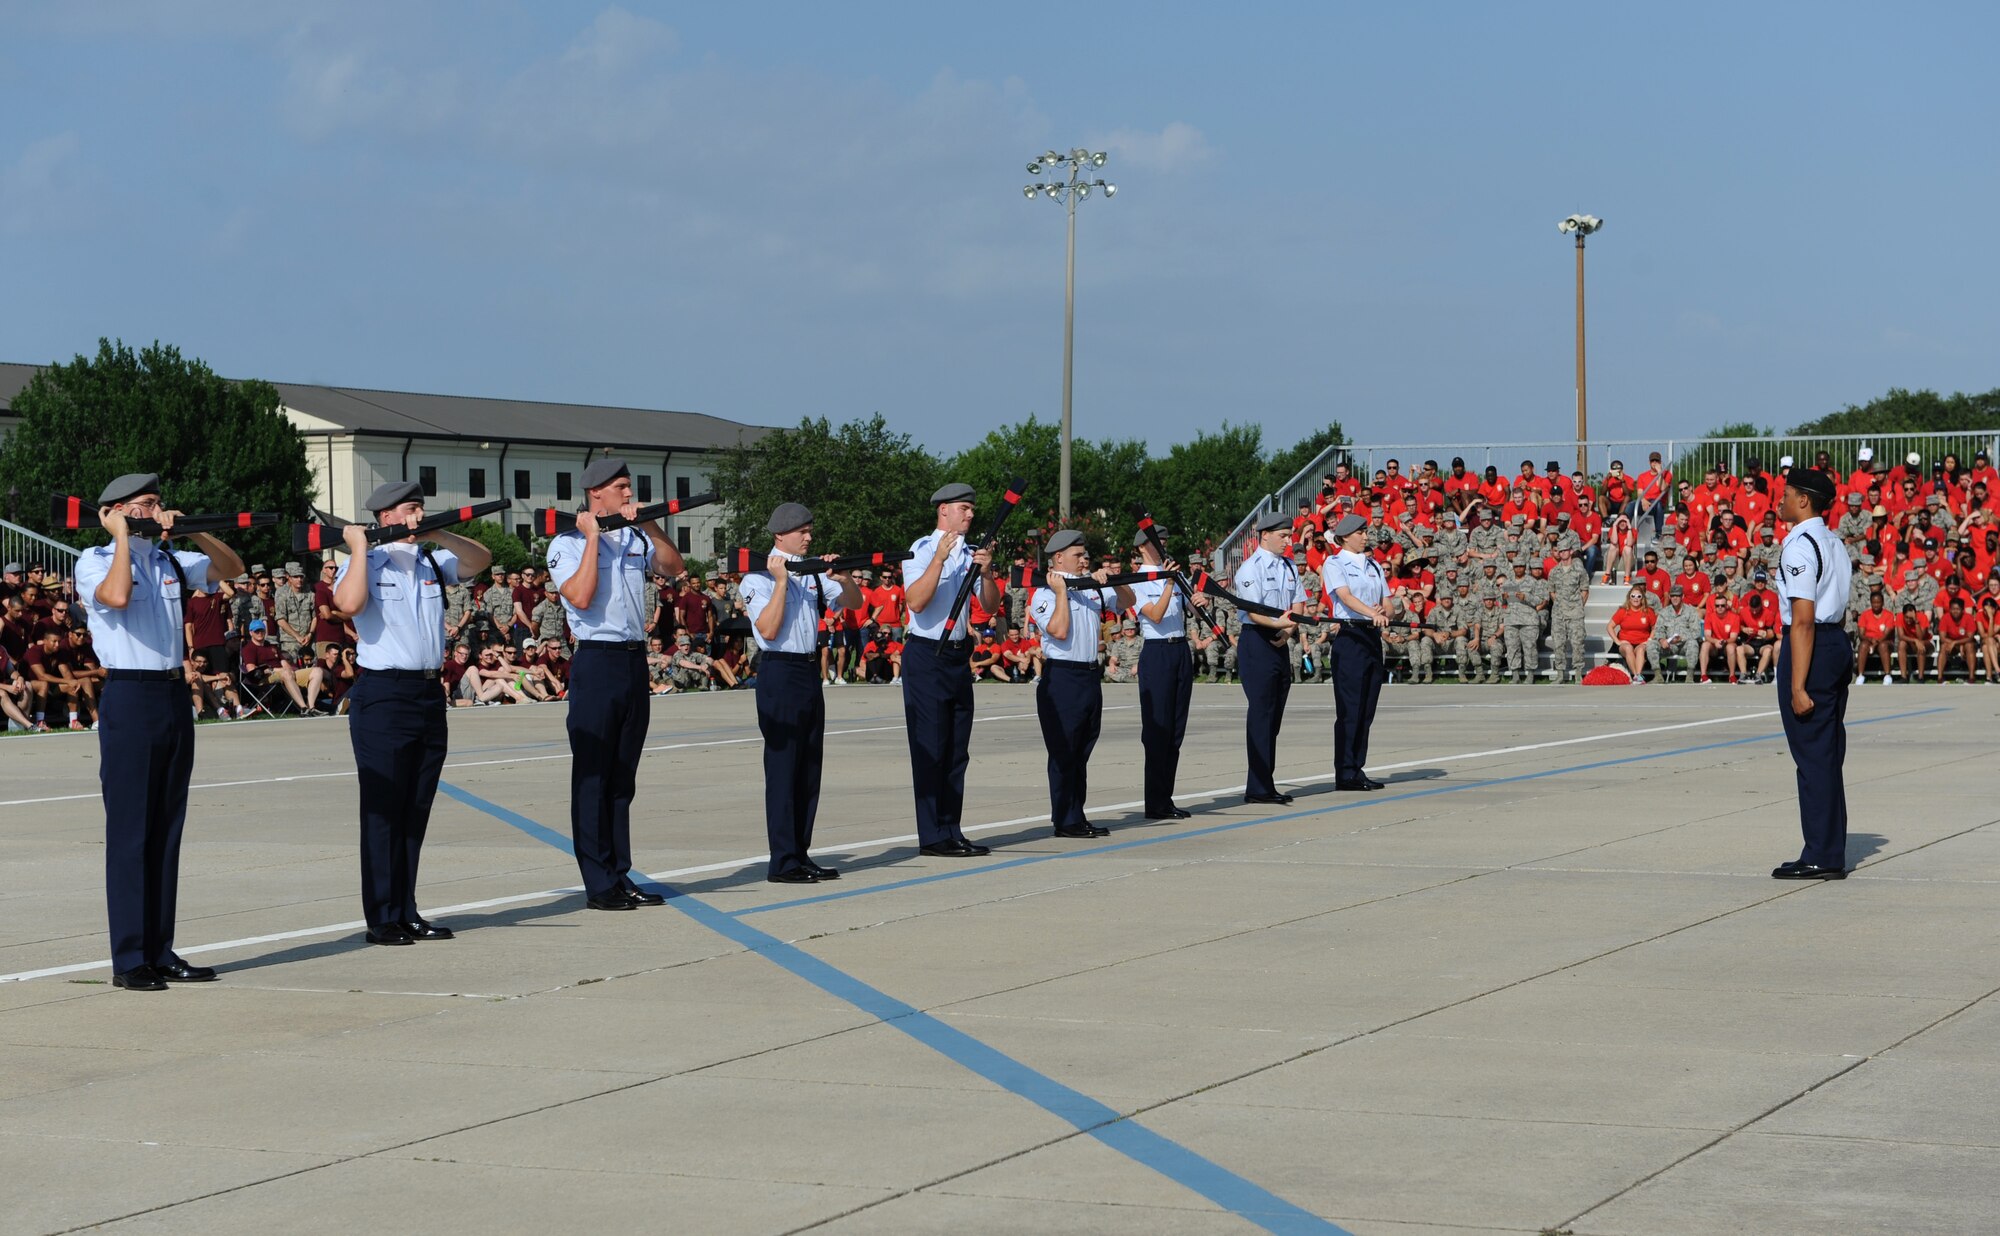 Members of the 335th Training Squadron freestyle drill team perform during the 81st Training Group drill down at the Levitow Training Support Facility drill pad June 17, 2016, Keesler Air Force Base, Miss. The 335th TRS “Bulls” placed first in the freestyle and overall competitions. (U.S. Air Force photo by Kemberly Groue)